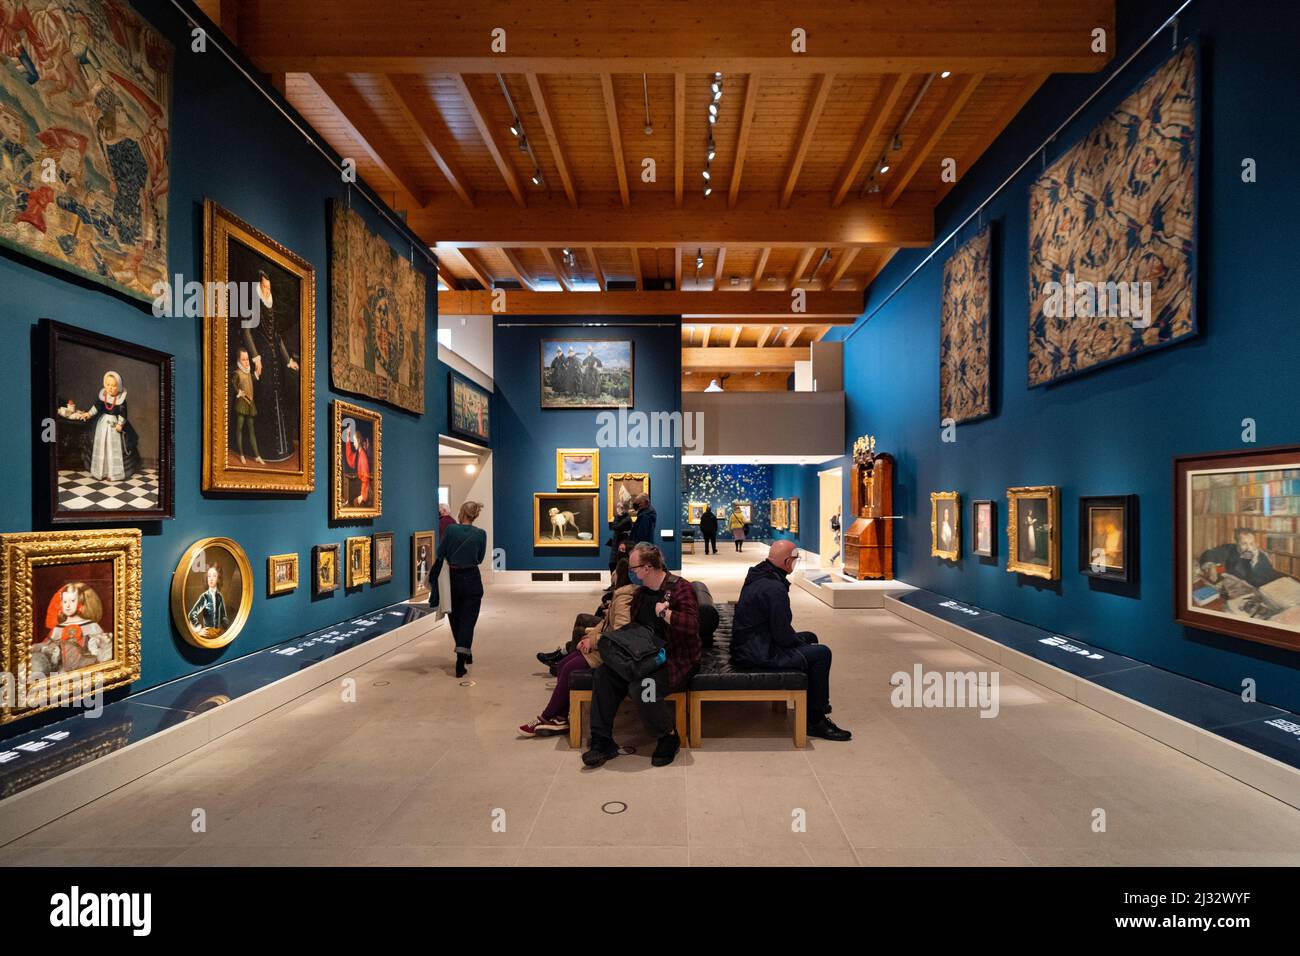 Interior of the Burrell Collection museum in Pollok Park Glasgow after it reopened following an extensive refurbishment. Scotland , UK. Photo; Interio Stock Photo